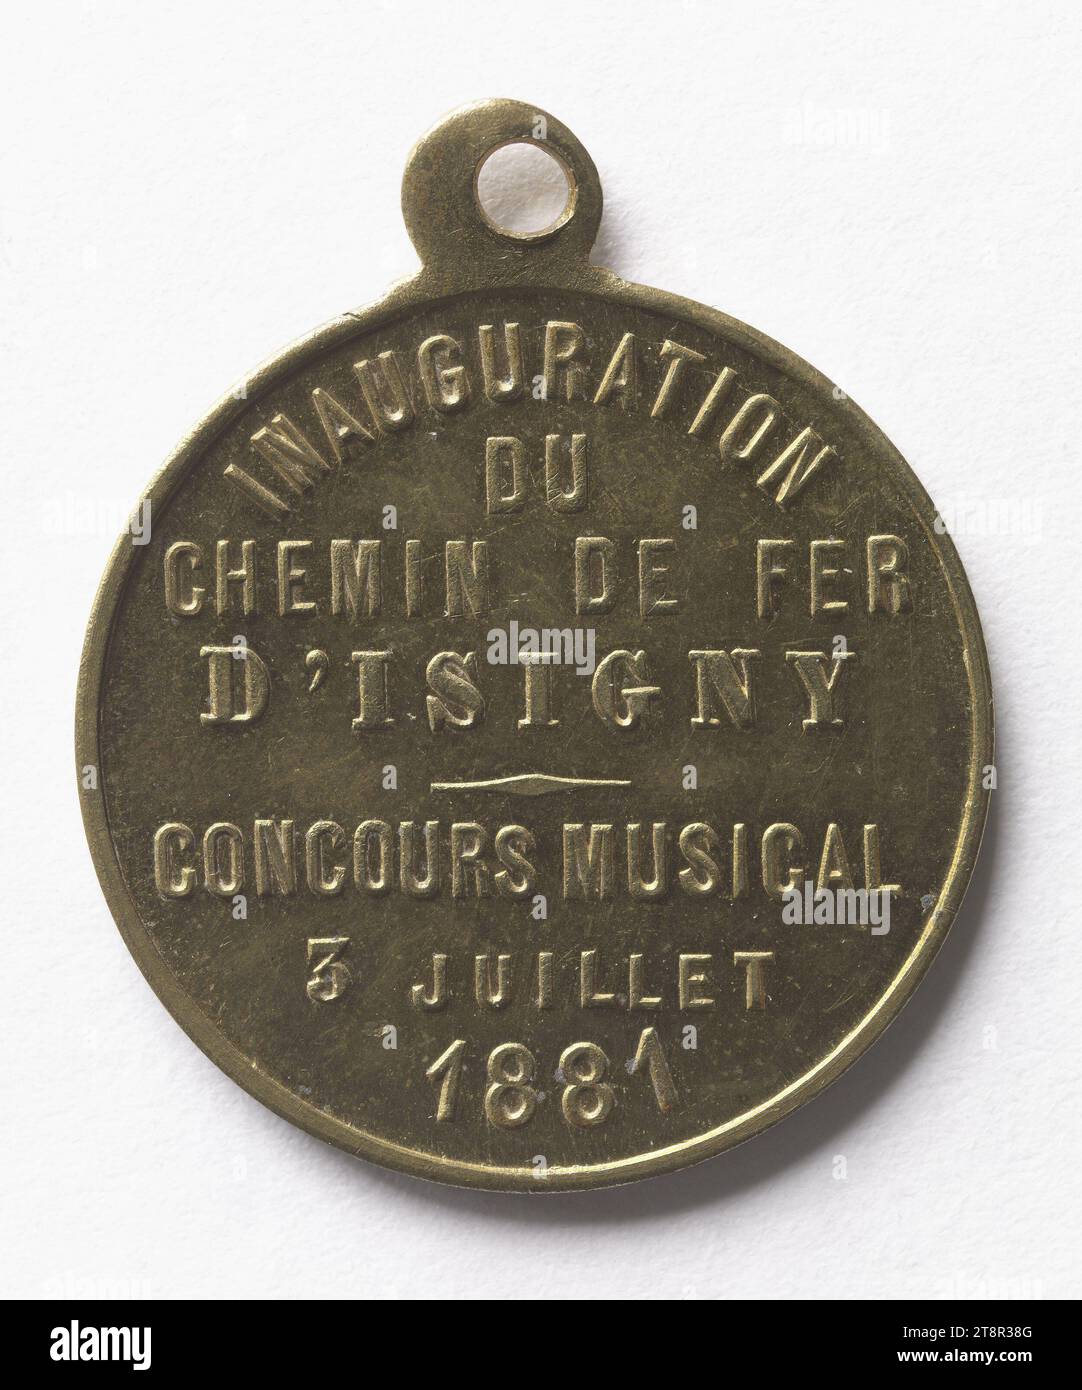 Musical contest during the inauguration of the railway of Isigny, July 3, 1881, Array, Numismatic, Medal, Copper, Gilt = gilding, Dimensions - Work: Diameter: 2.3 cm, Weight (type dimension): 3.76 g Stock Photo